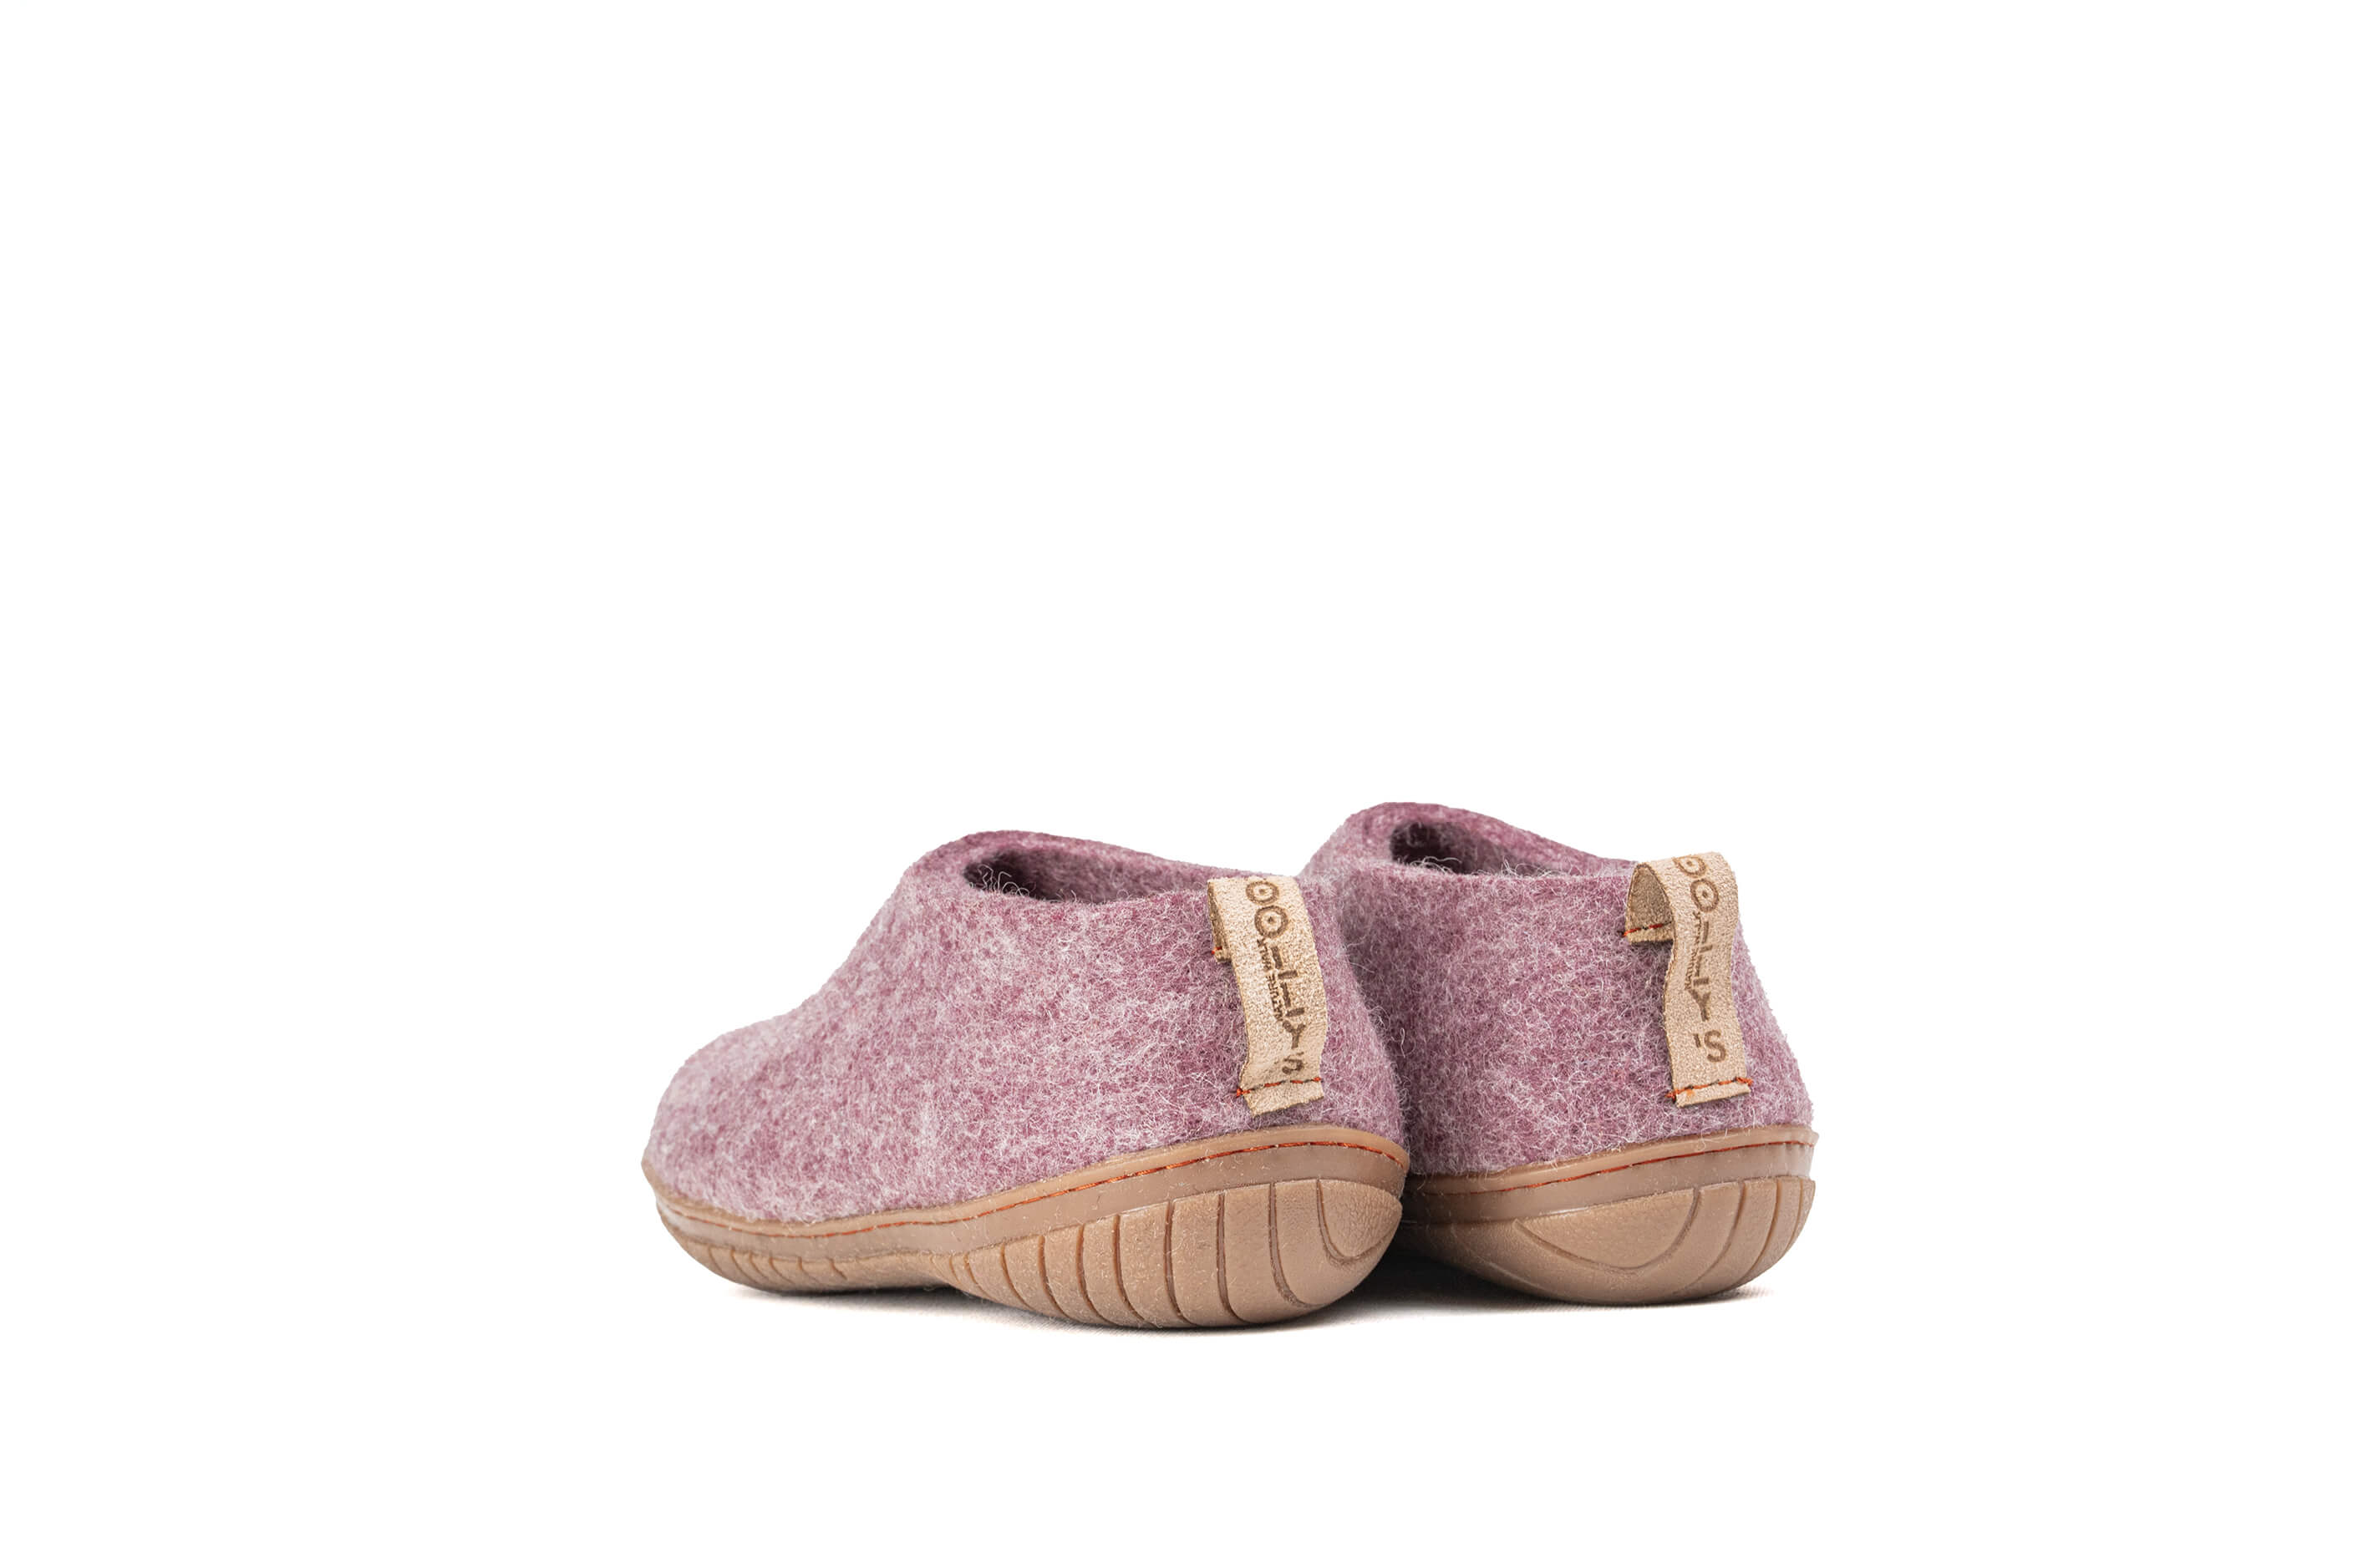 Outdoor Shoes With Rubber Sole - Lavender